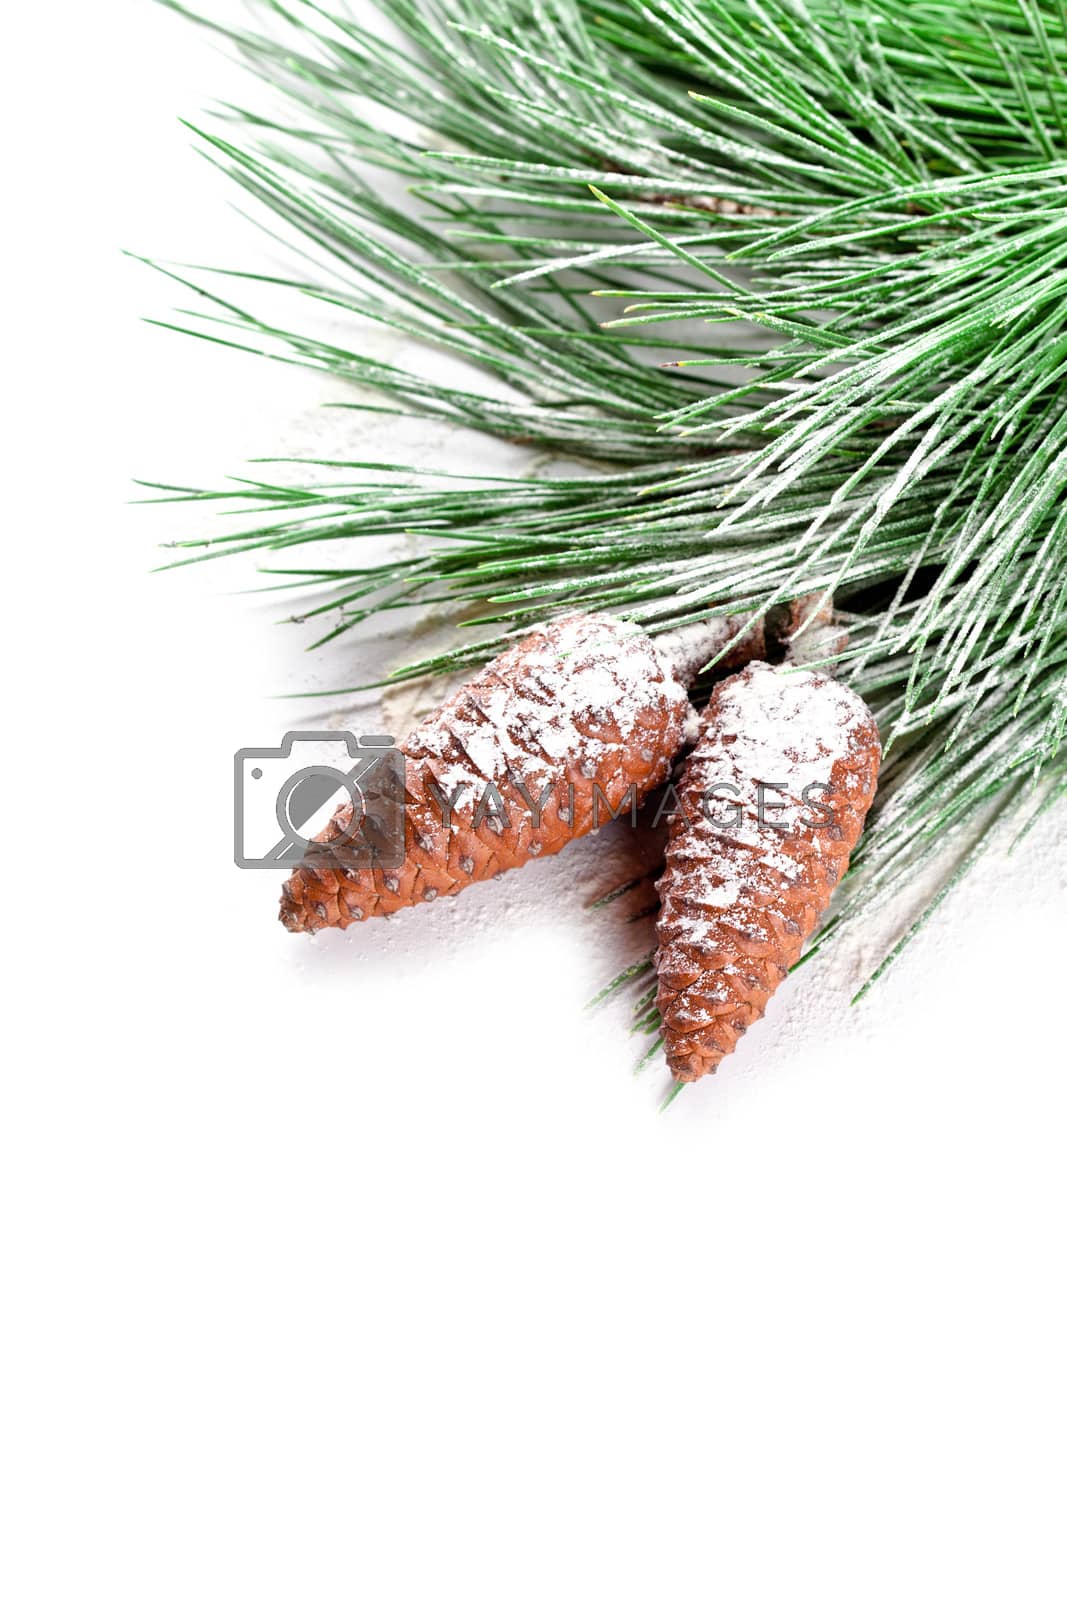 Royalty free image of fir tree branch with pinecones  by marylooo